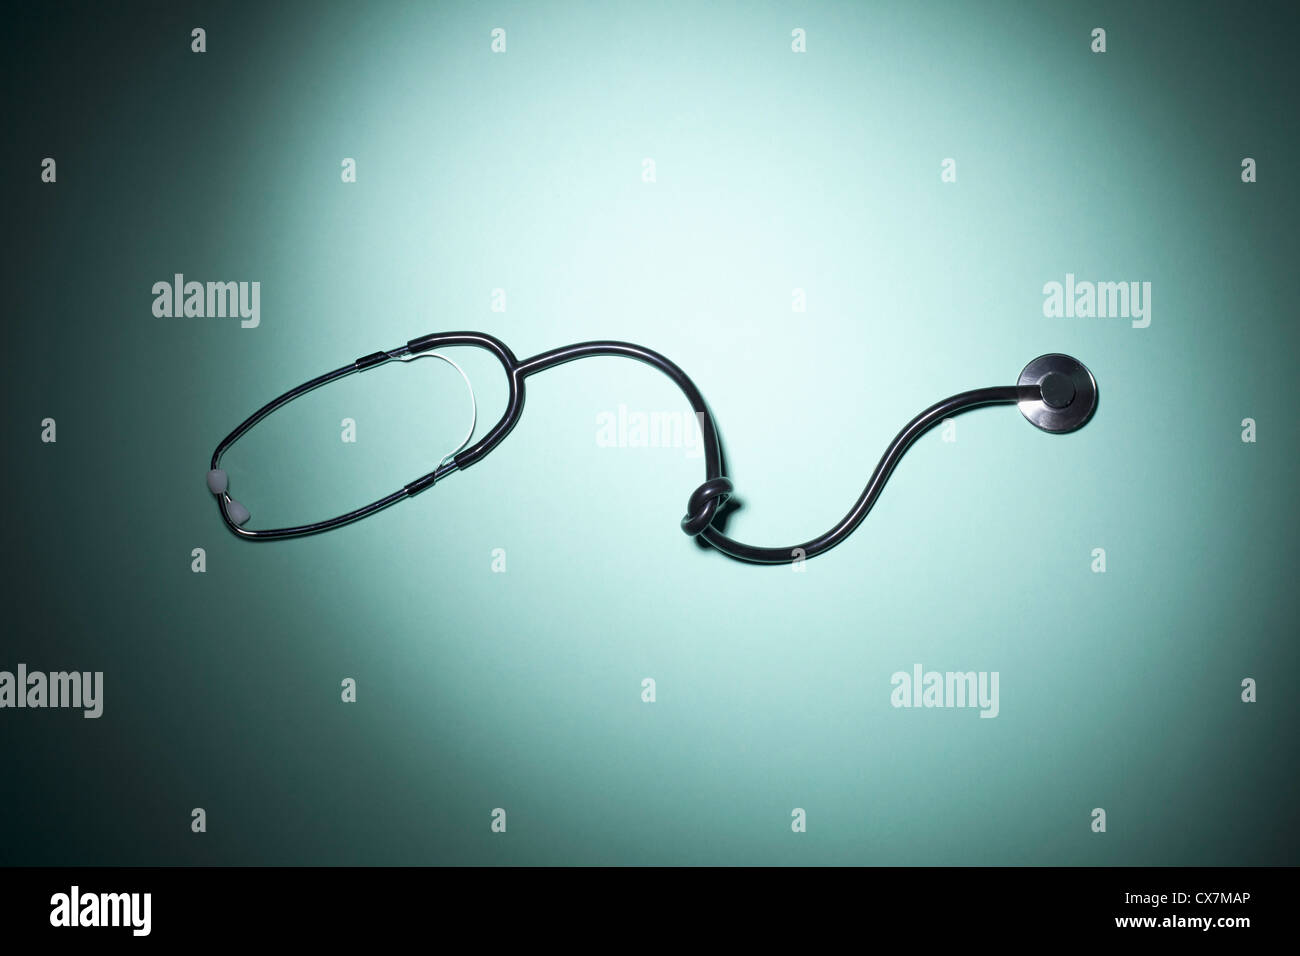 A stethoscope tied in a knot Stock Photo